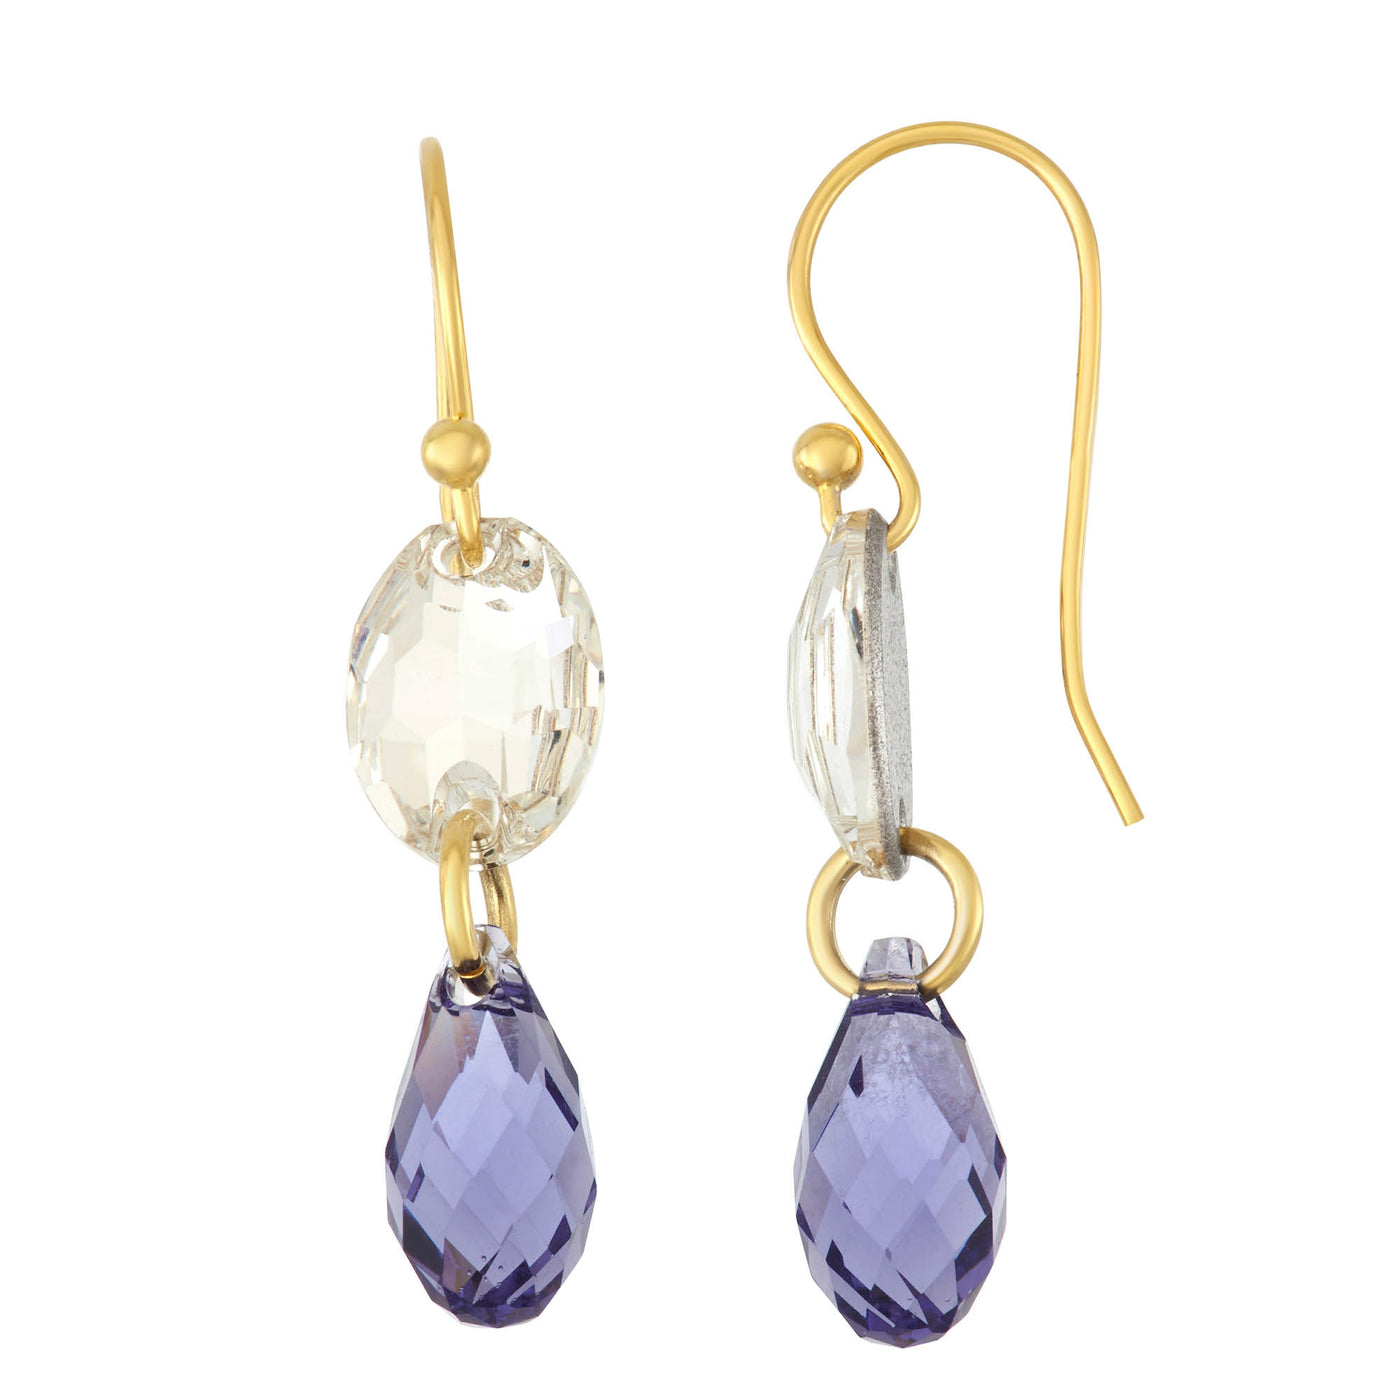 Rebecca Sloane Gold Oval Tear Drop Earring With Purple Crystals